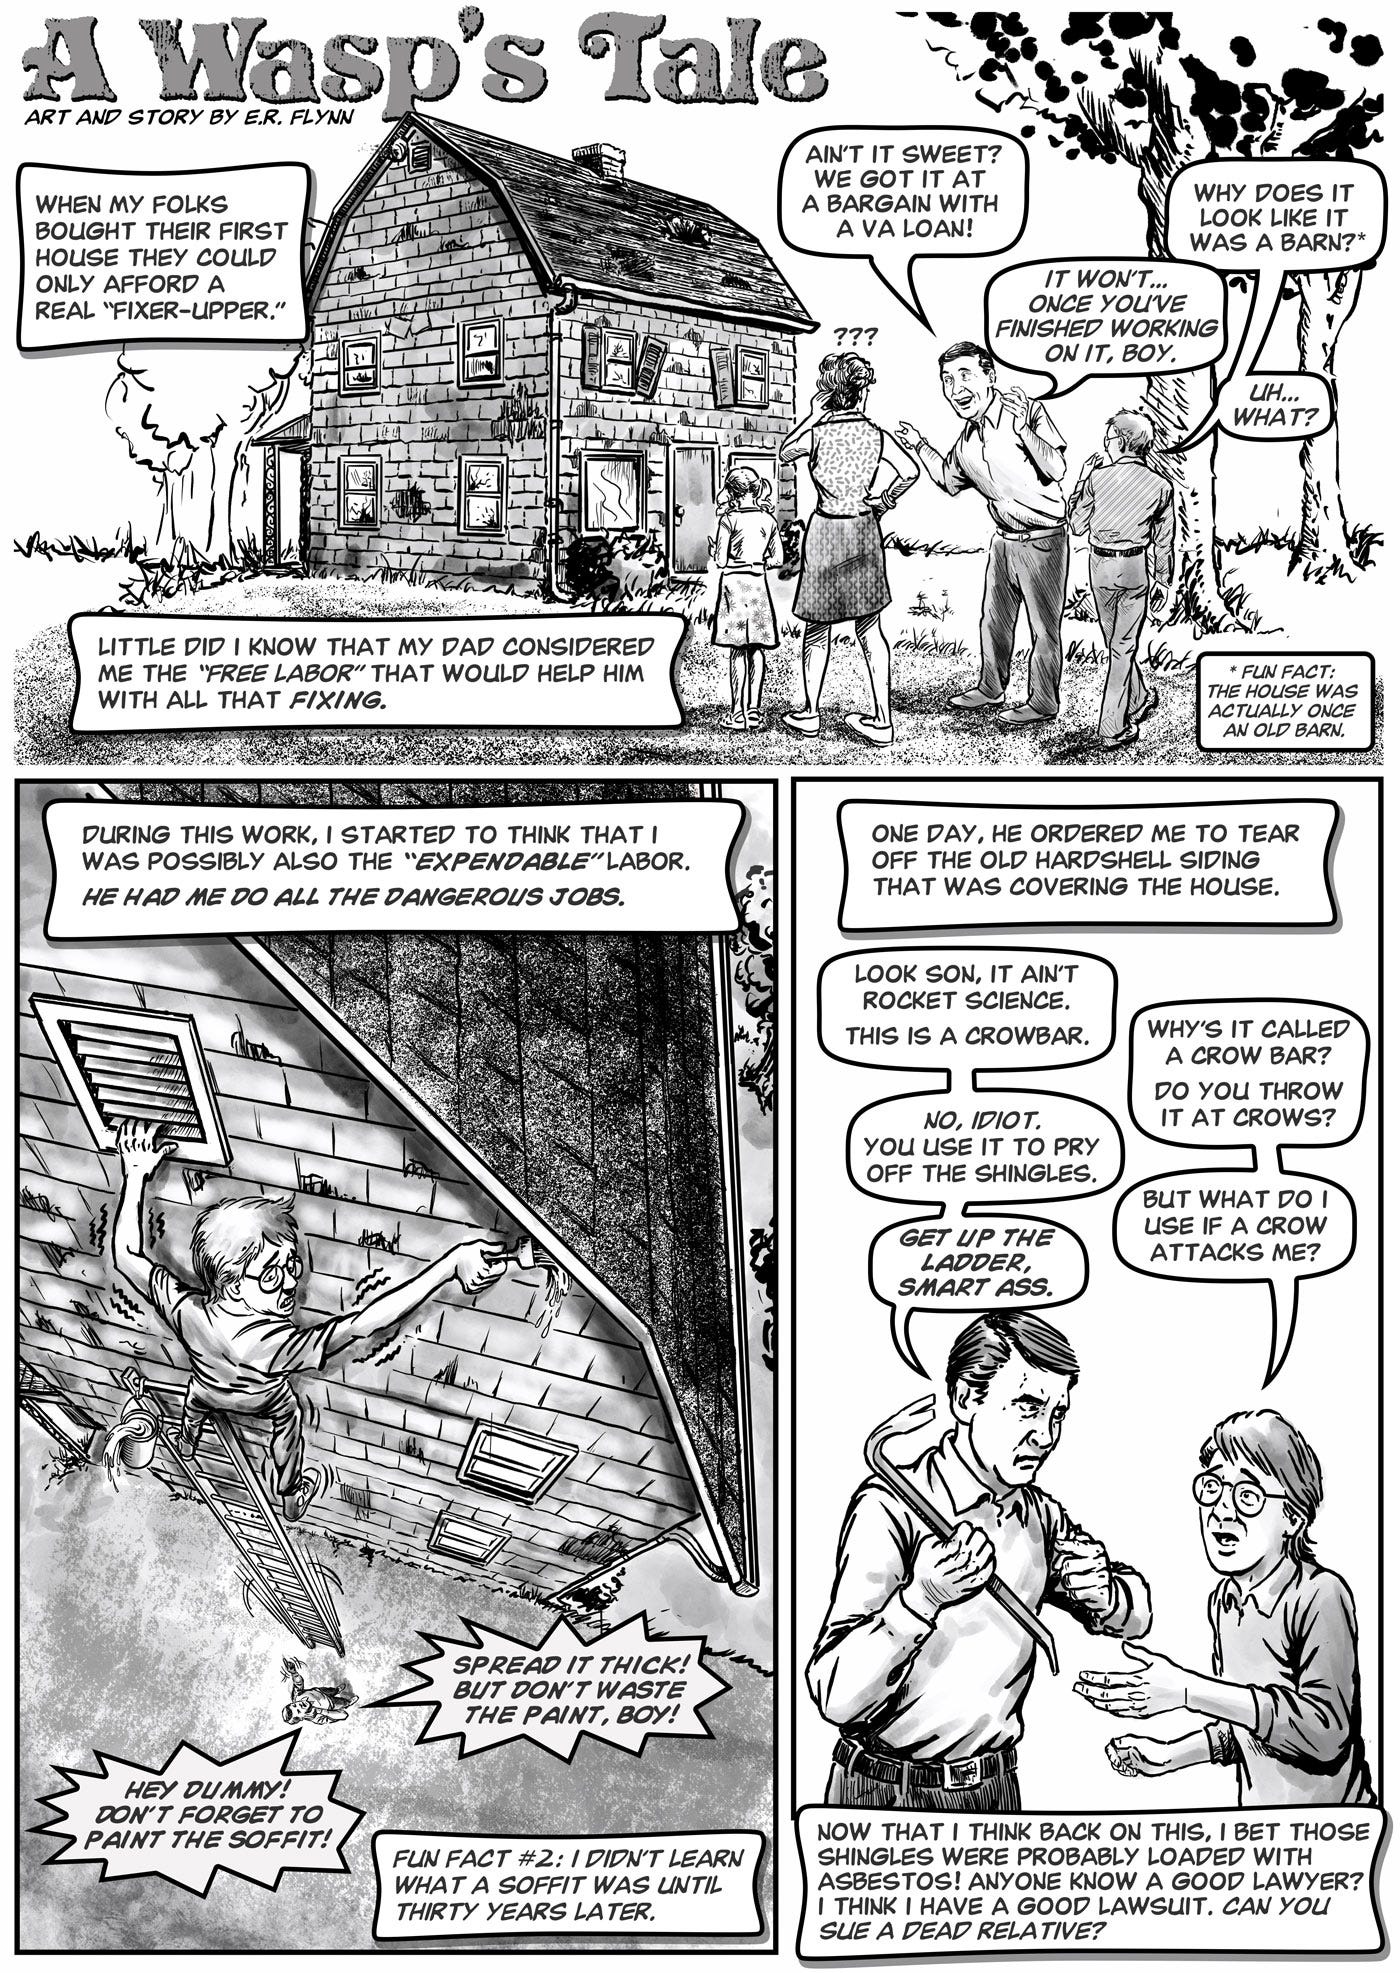 A wasps Tale Comic Page 1 by ERE Flynn